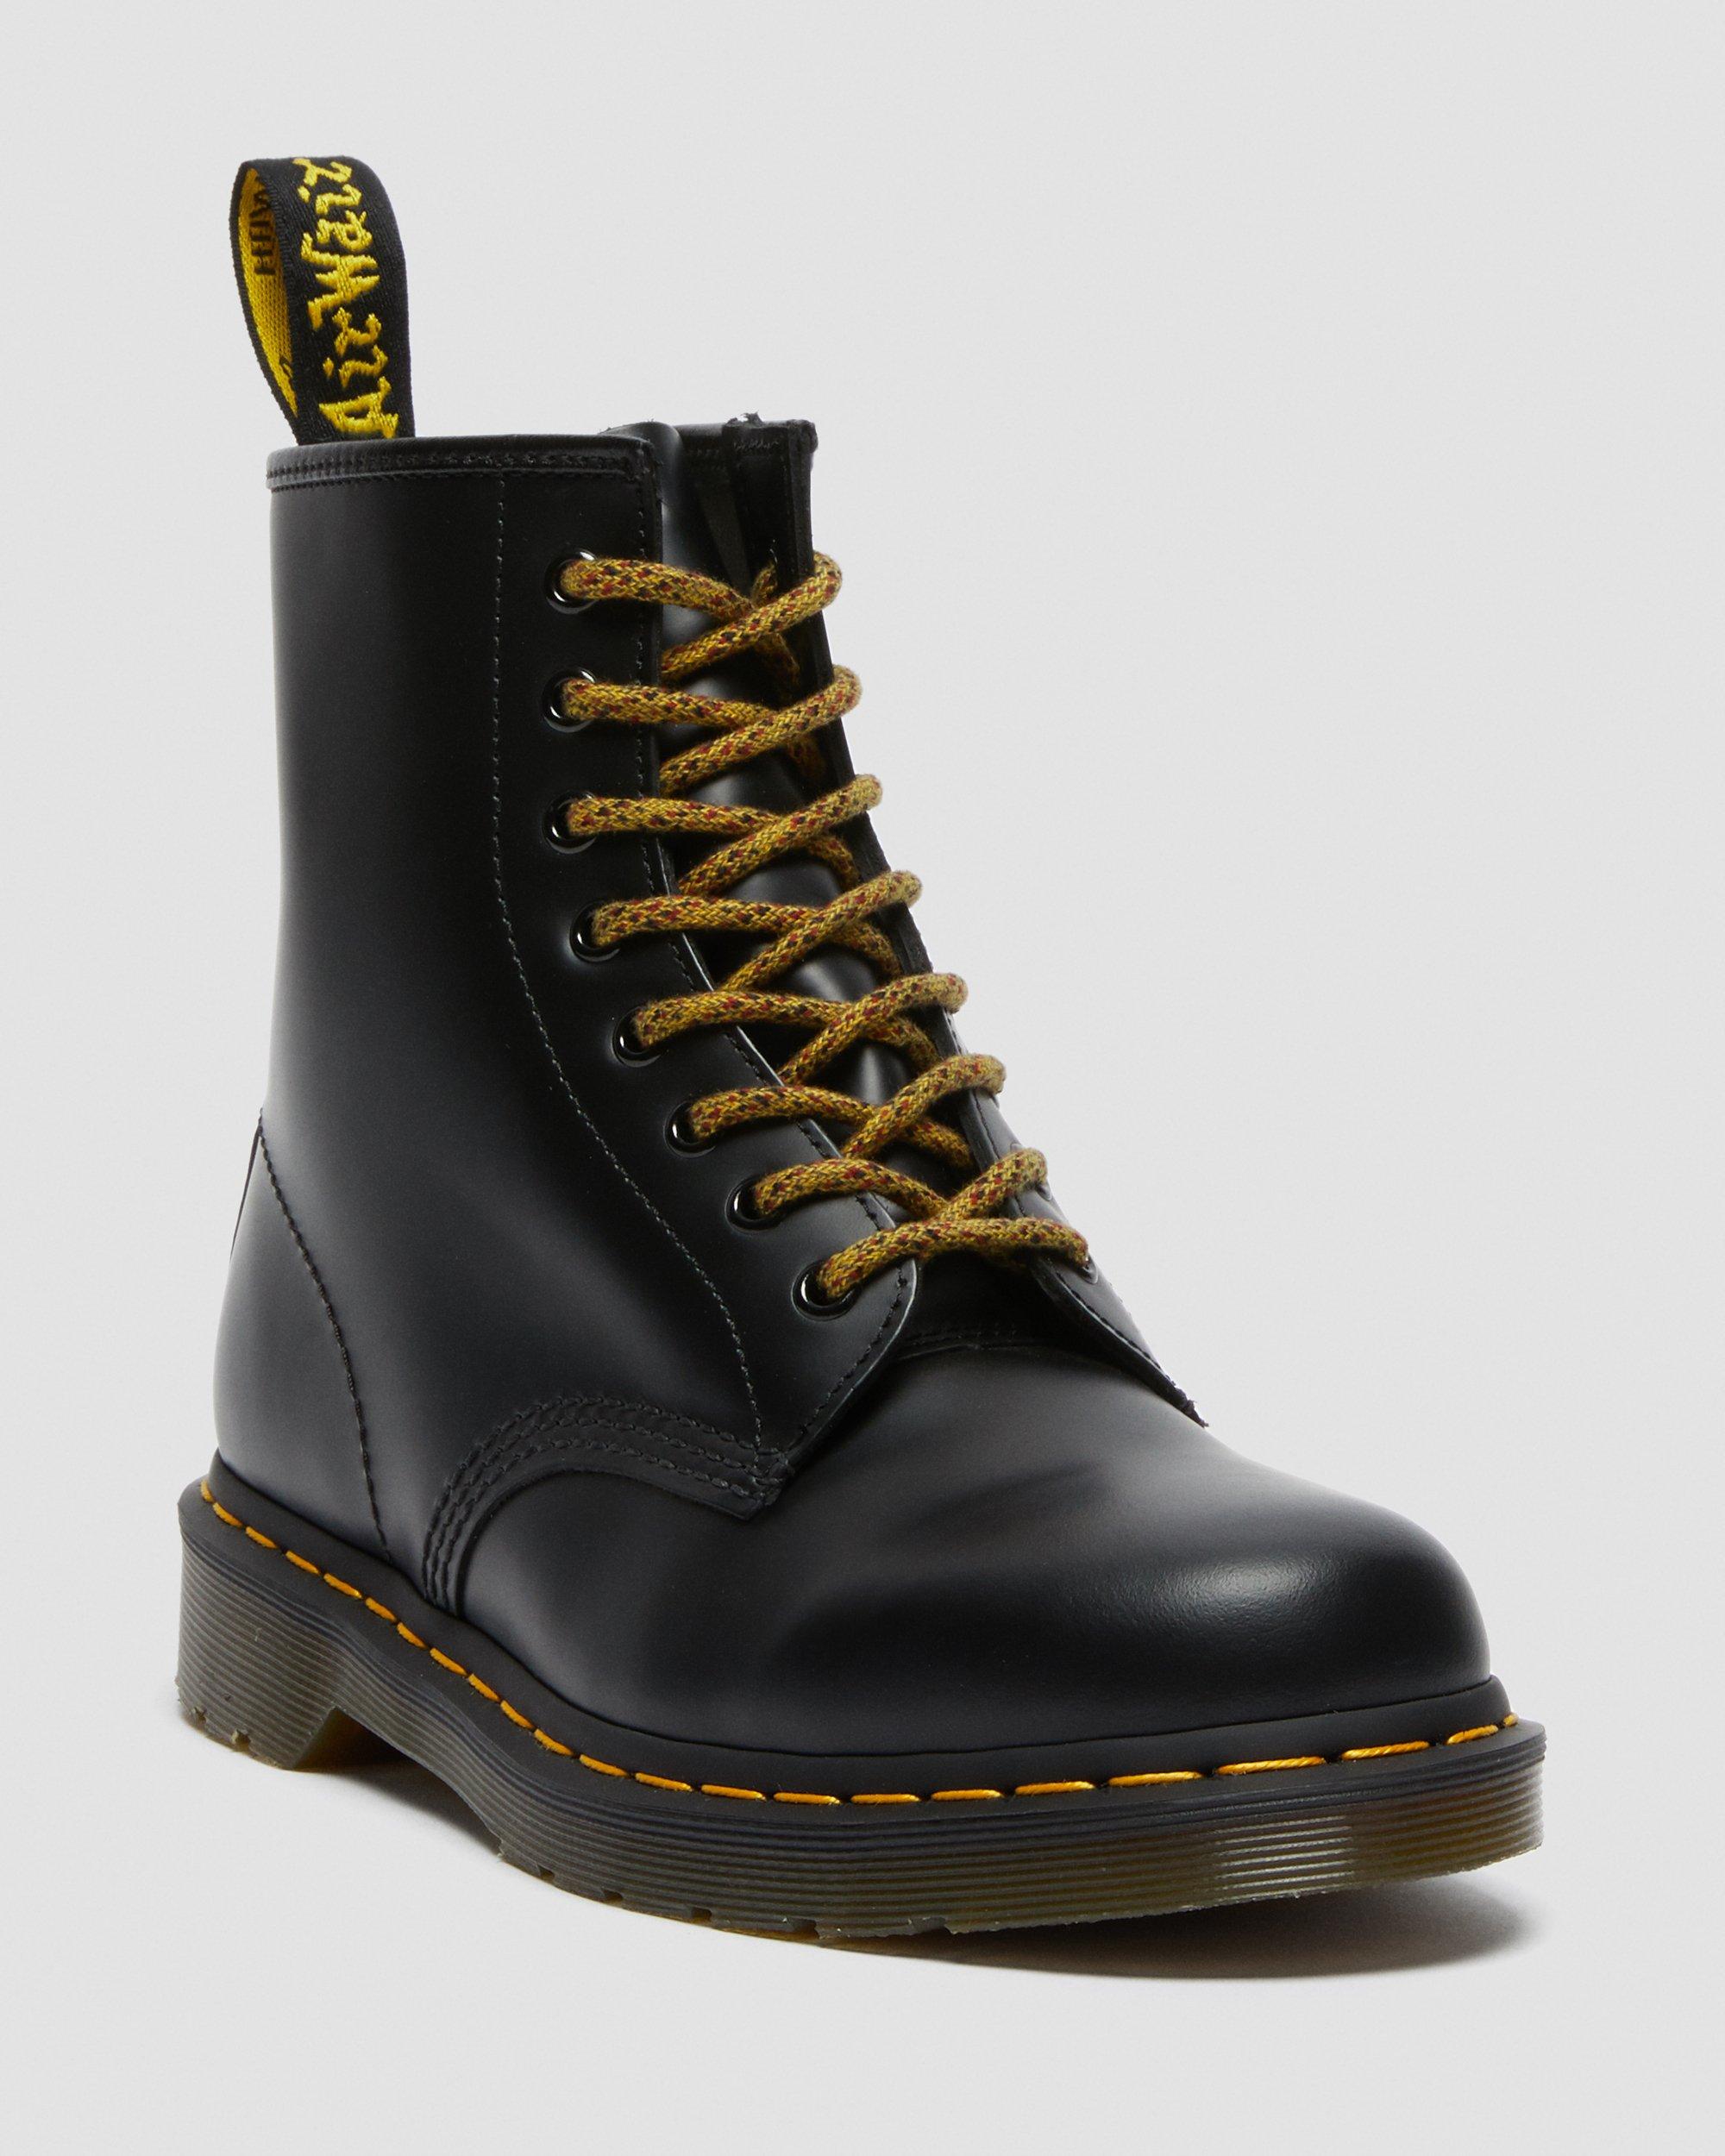 55 Inch Round Marl Shoe Laces (8-10 Eye) in Yellow | Dr. Martens